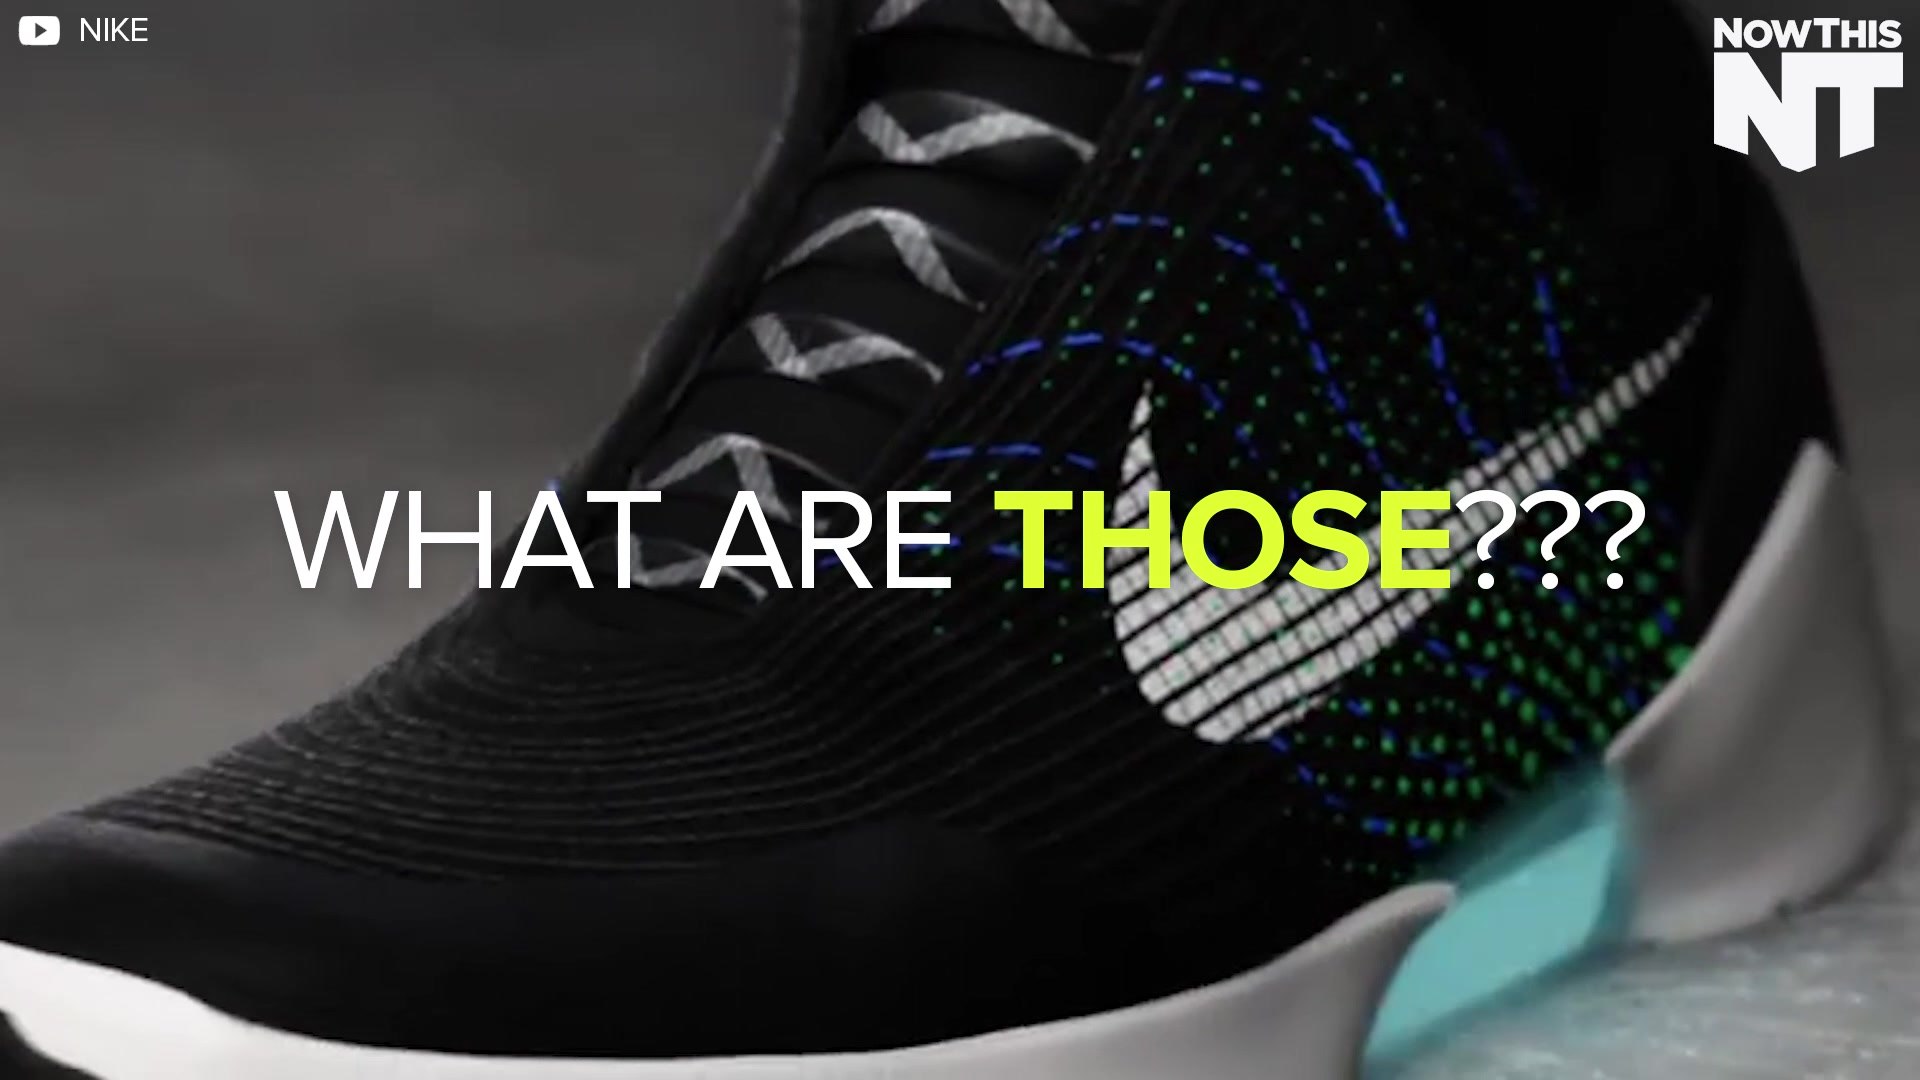 Nike Introduces HyperAdapt 1.0 Self-Lacing Shoes - video Dailymotion